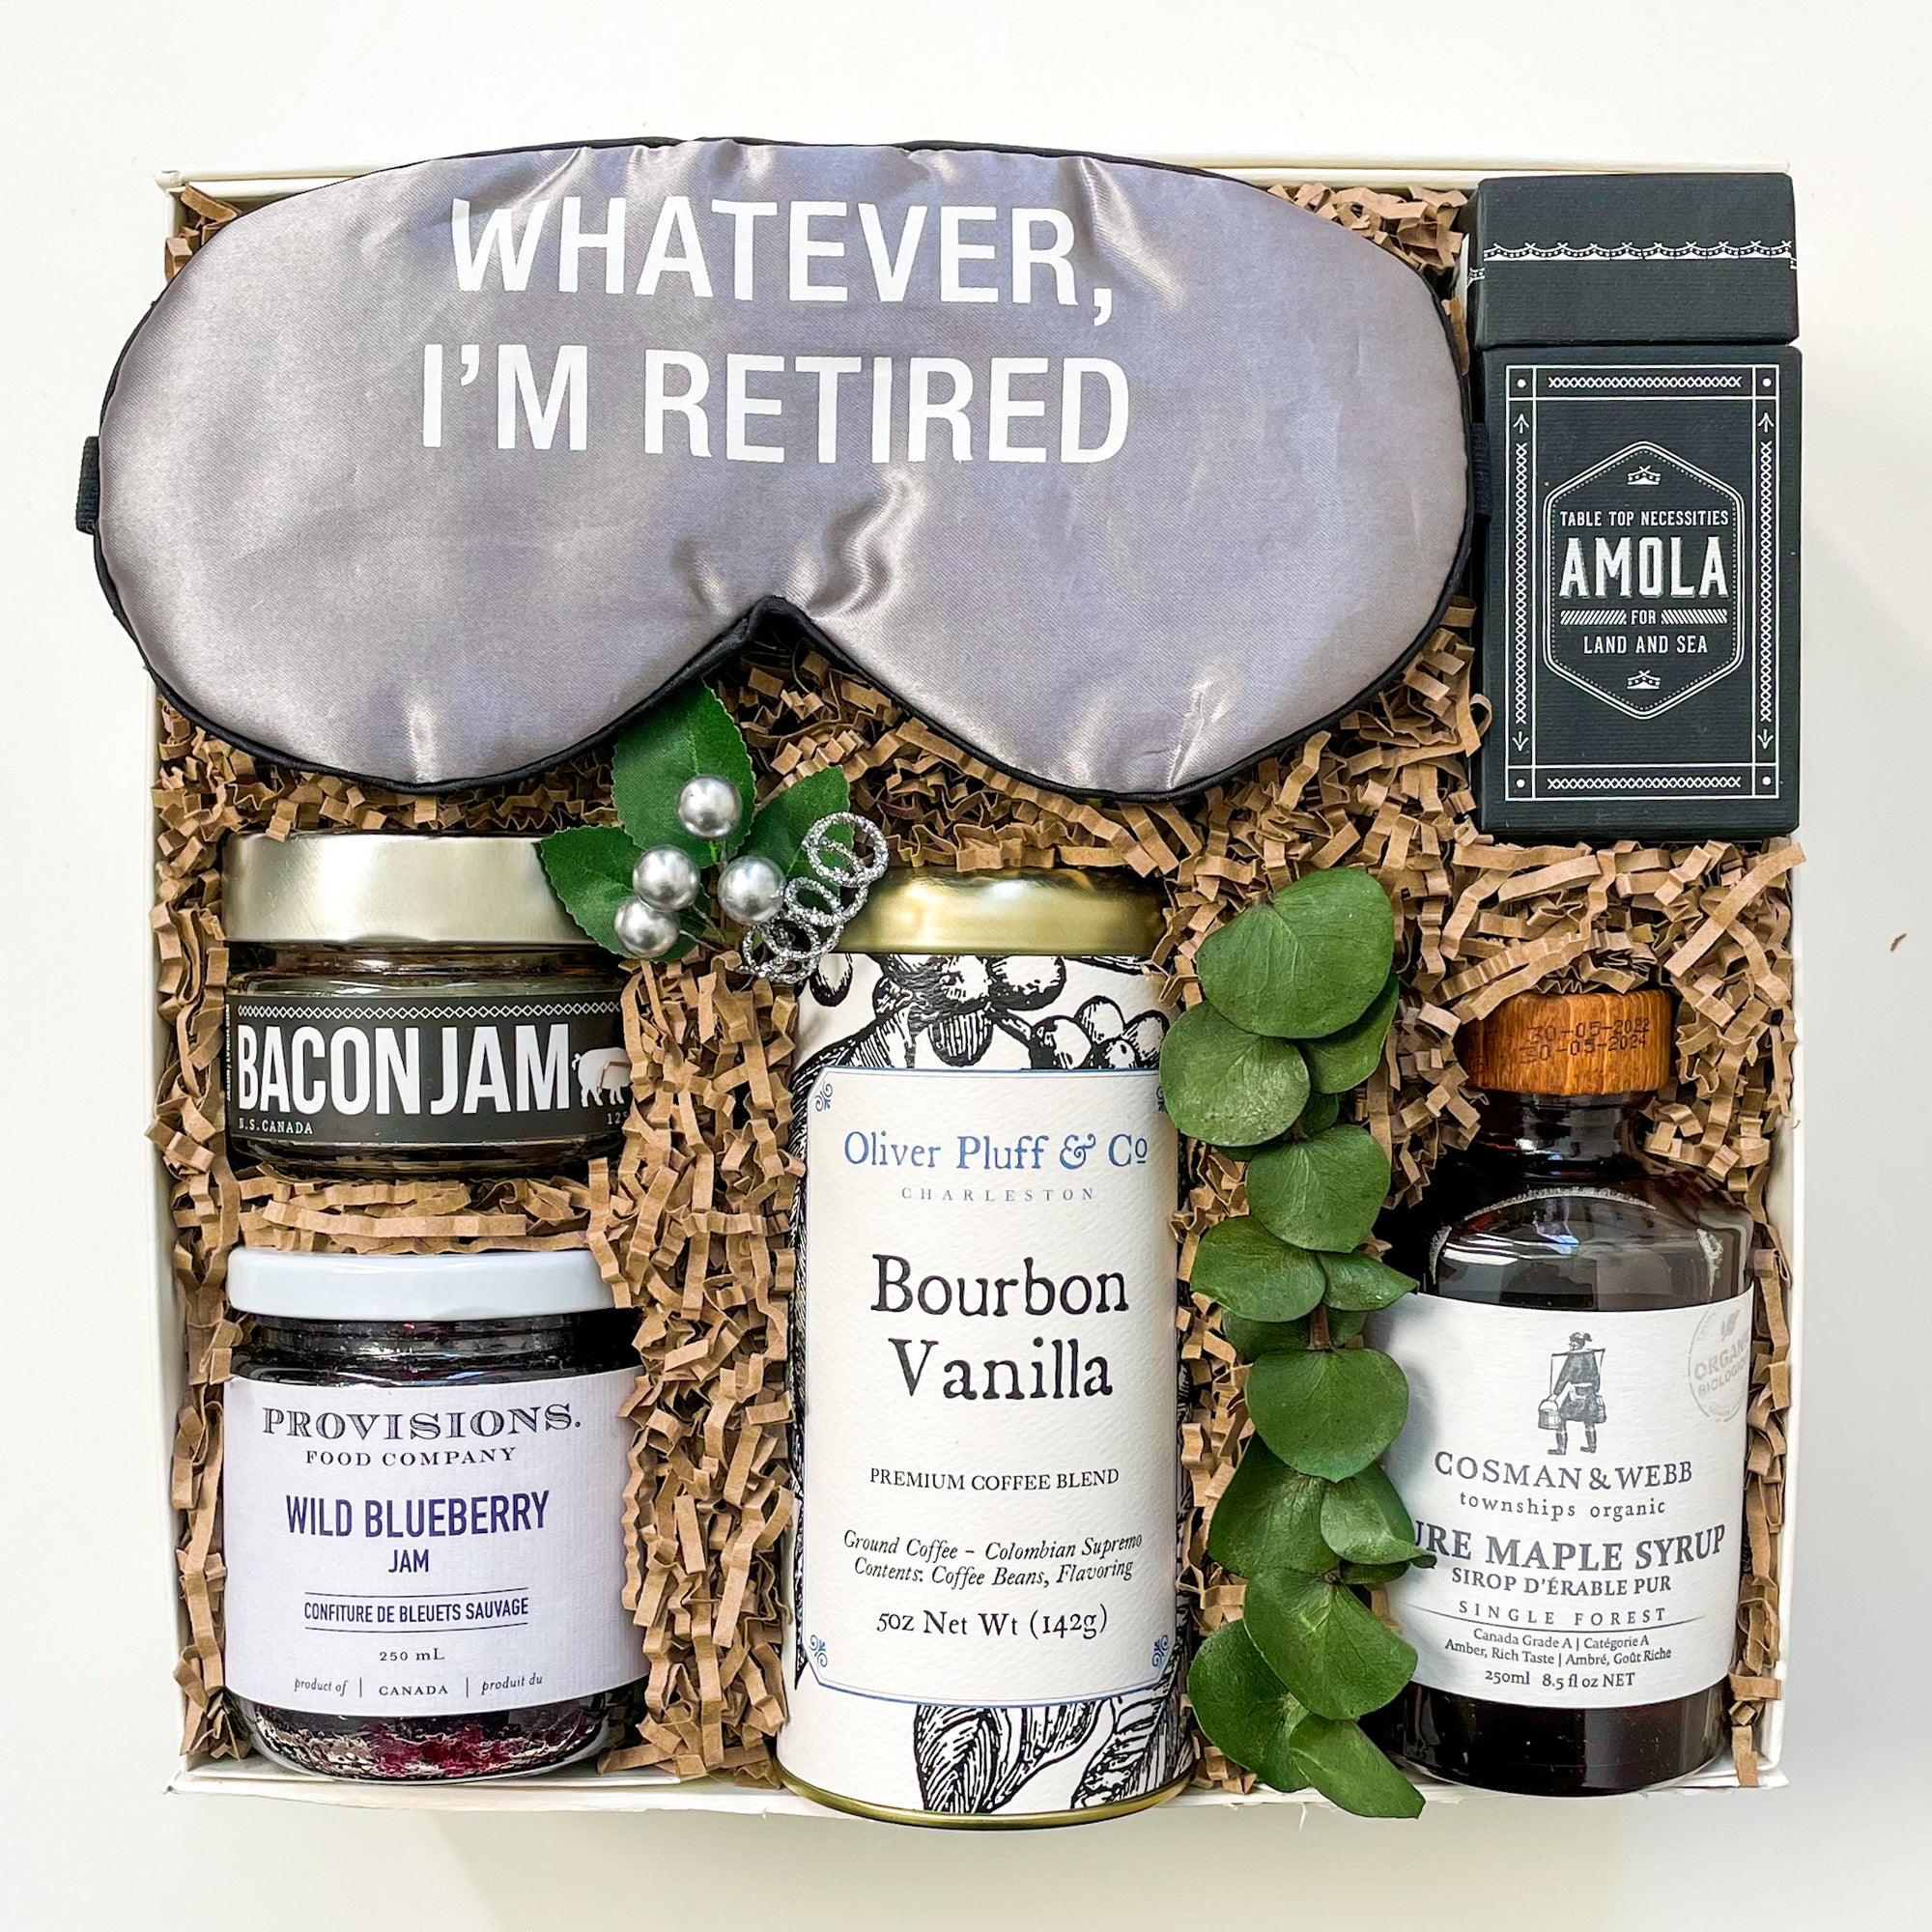 Retirement gift, retirement gift boxes, unique retirement gift ideas, congratulations gifts, congratulatory gifts, funny retirement gifts, gifts for boss, funny boss gifts, best gifts for executives, classy retirement gifts, shipped gifts, shipped gifts Canada, retirement gift basket, Father's Day gifts, gifts for him, retirement gifts for dad, retirement gifts for him, best retirement gifts for men, gifts for him, gift for husband, gift for dad, gift for father, gift for boss